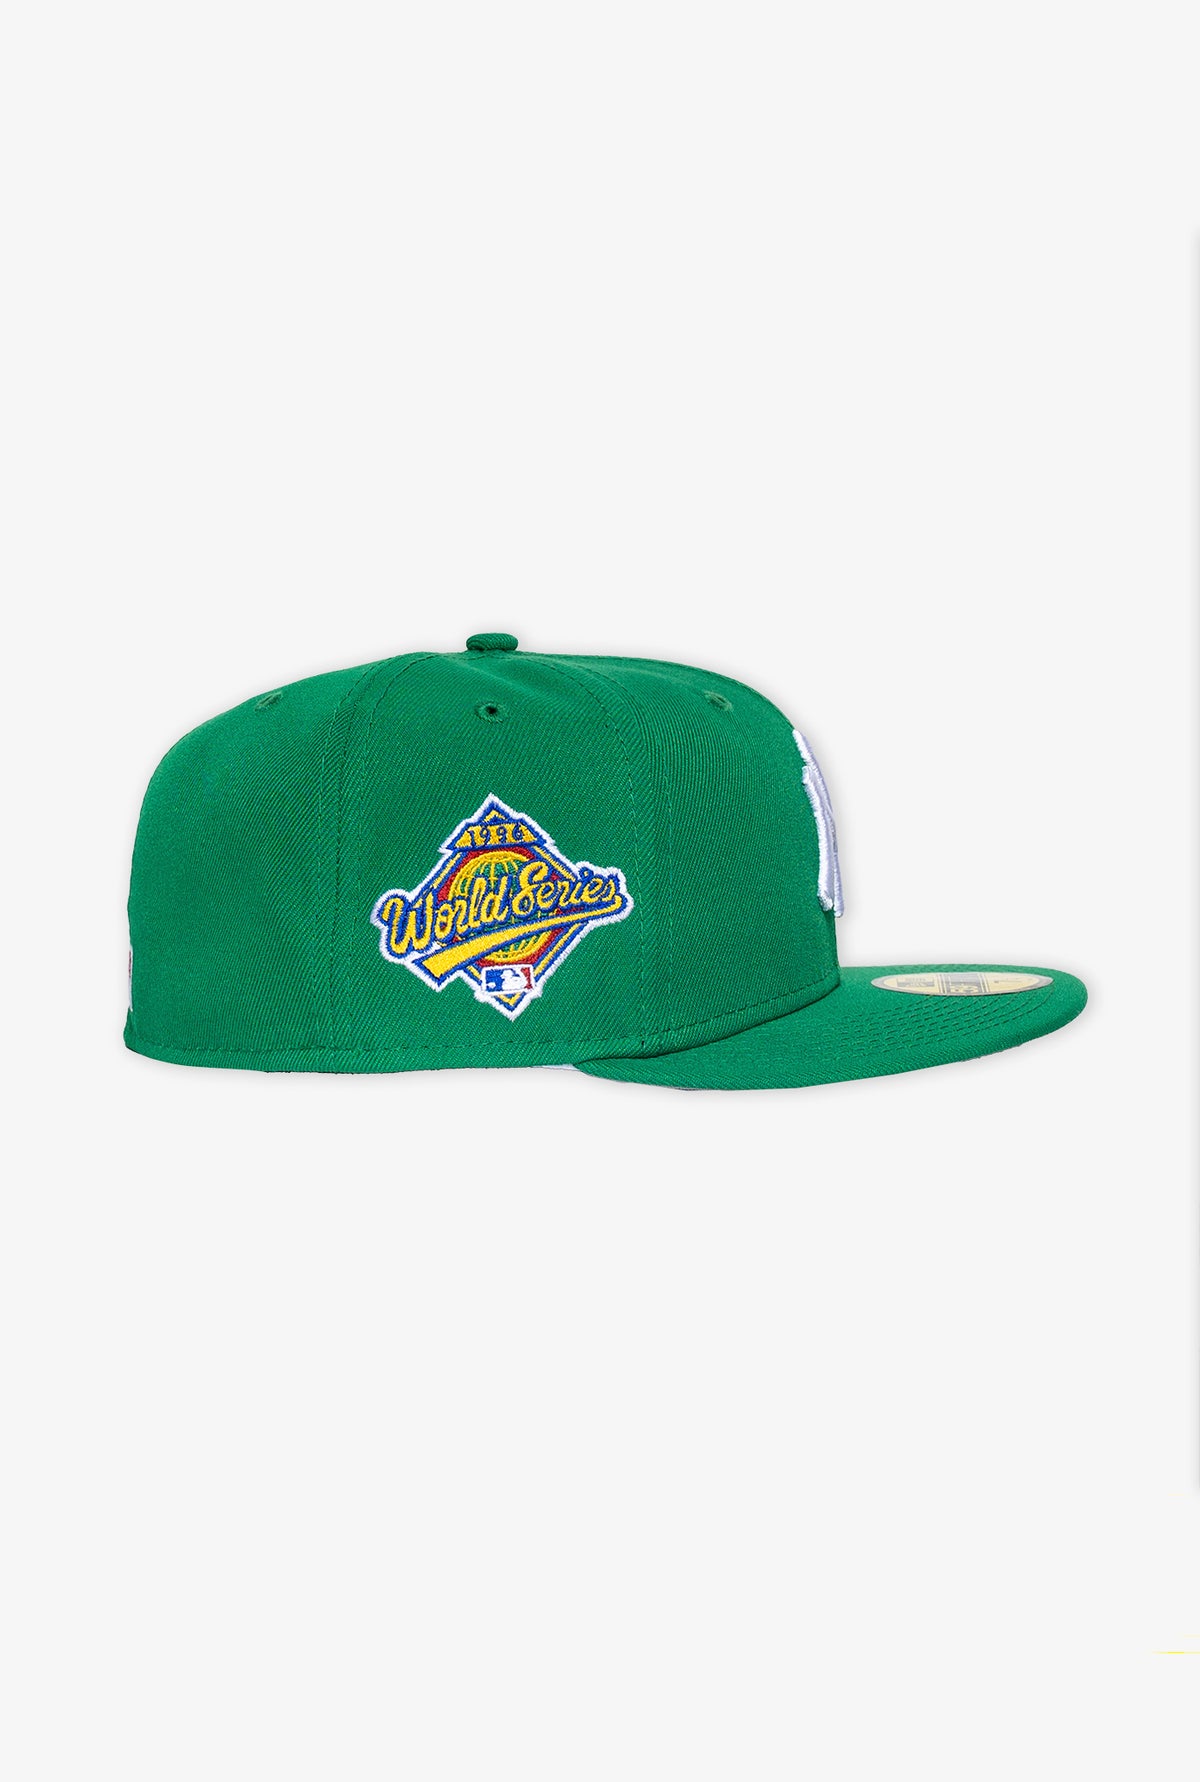 New York Yankees '96 World Series 59FIFTY - Kelly Green